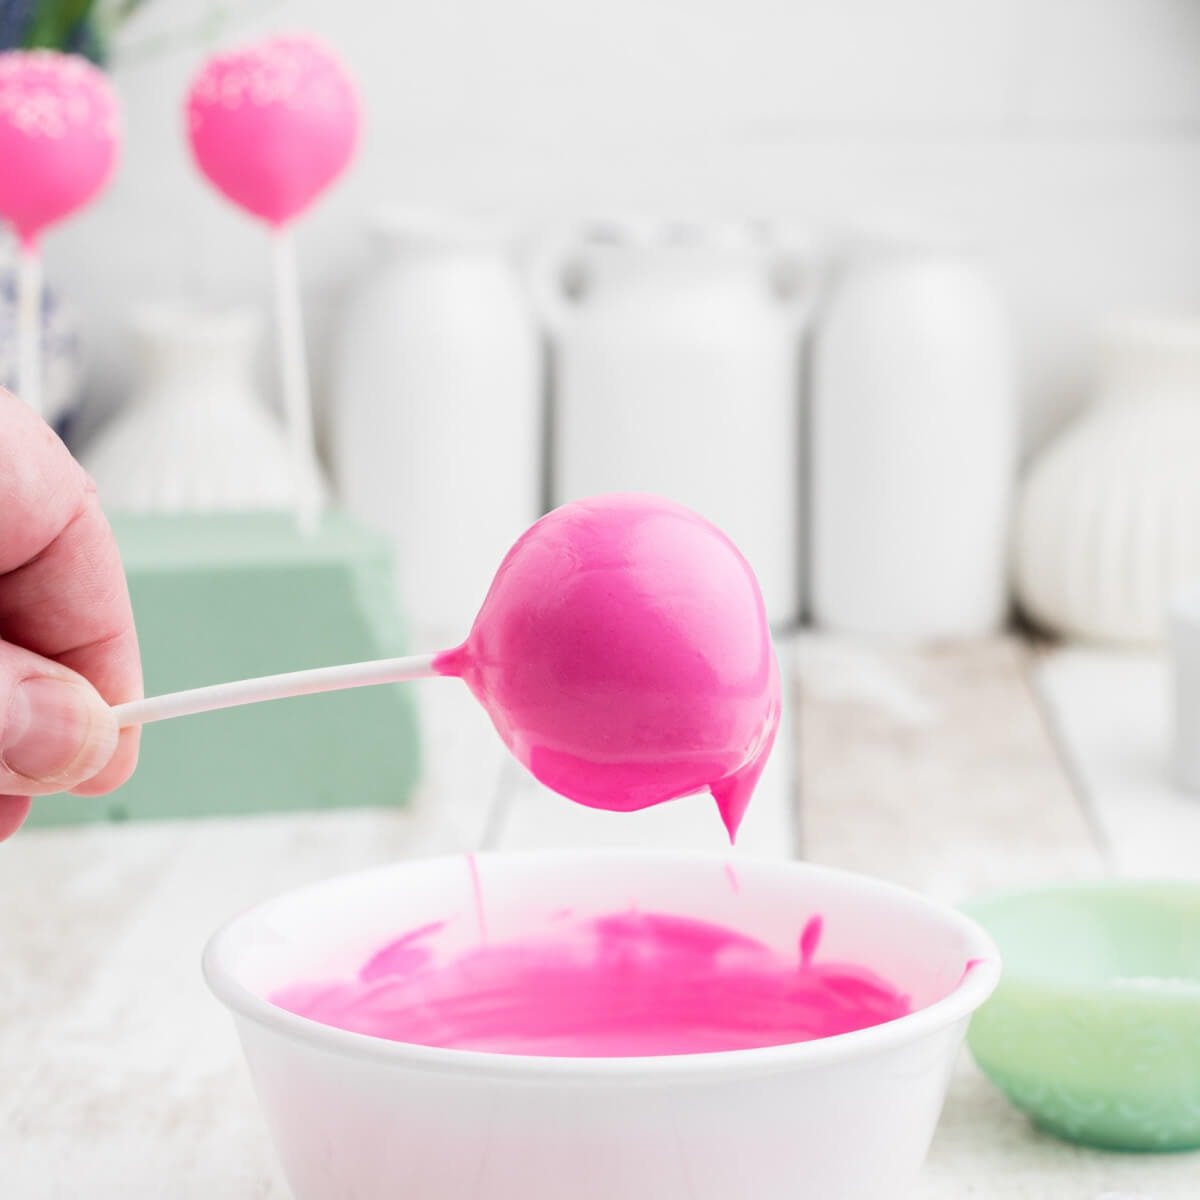 Cake pop being dipped into melted pink chocolate.